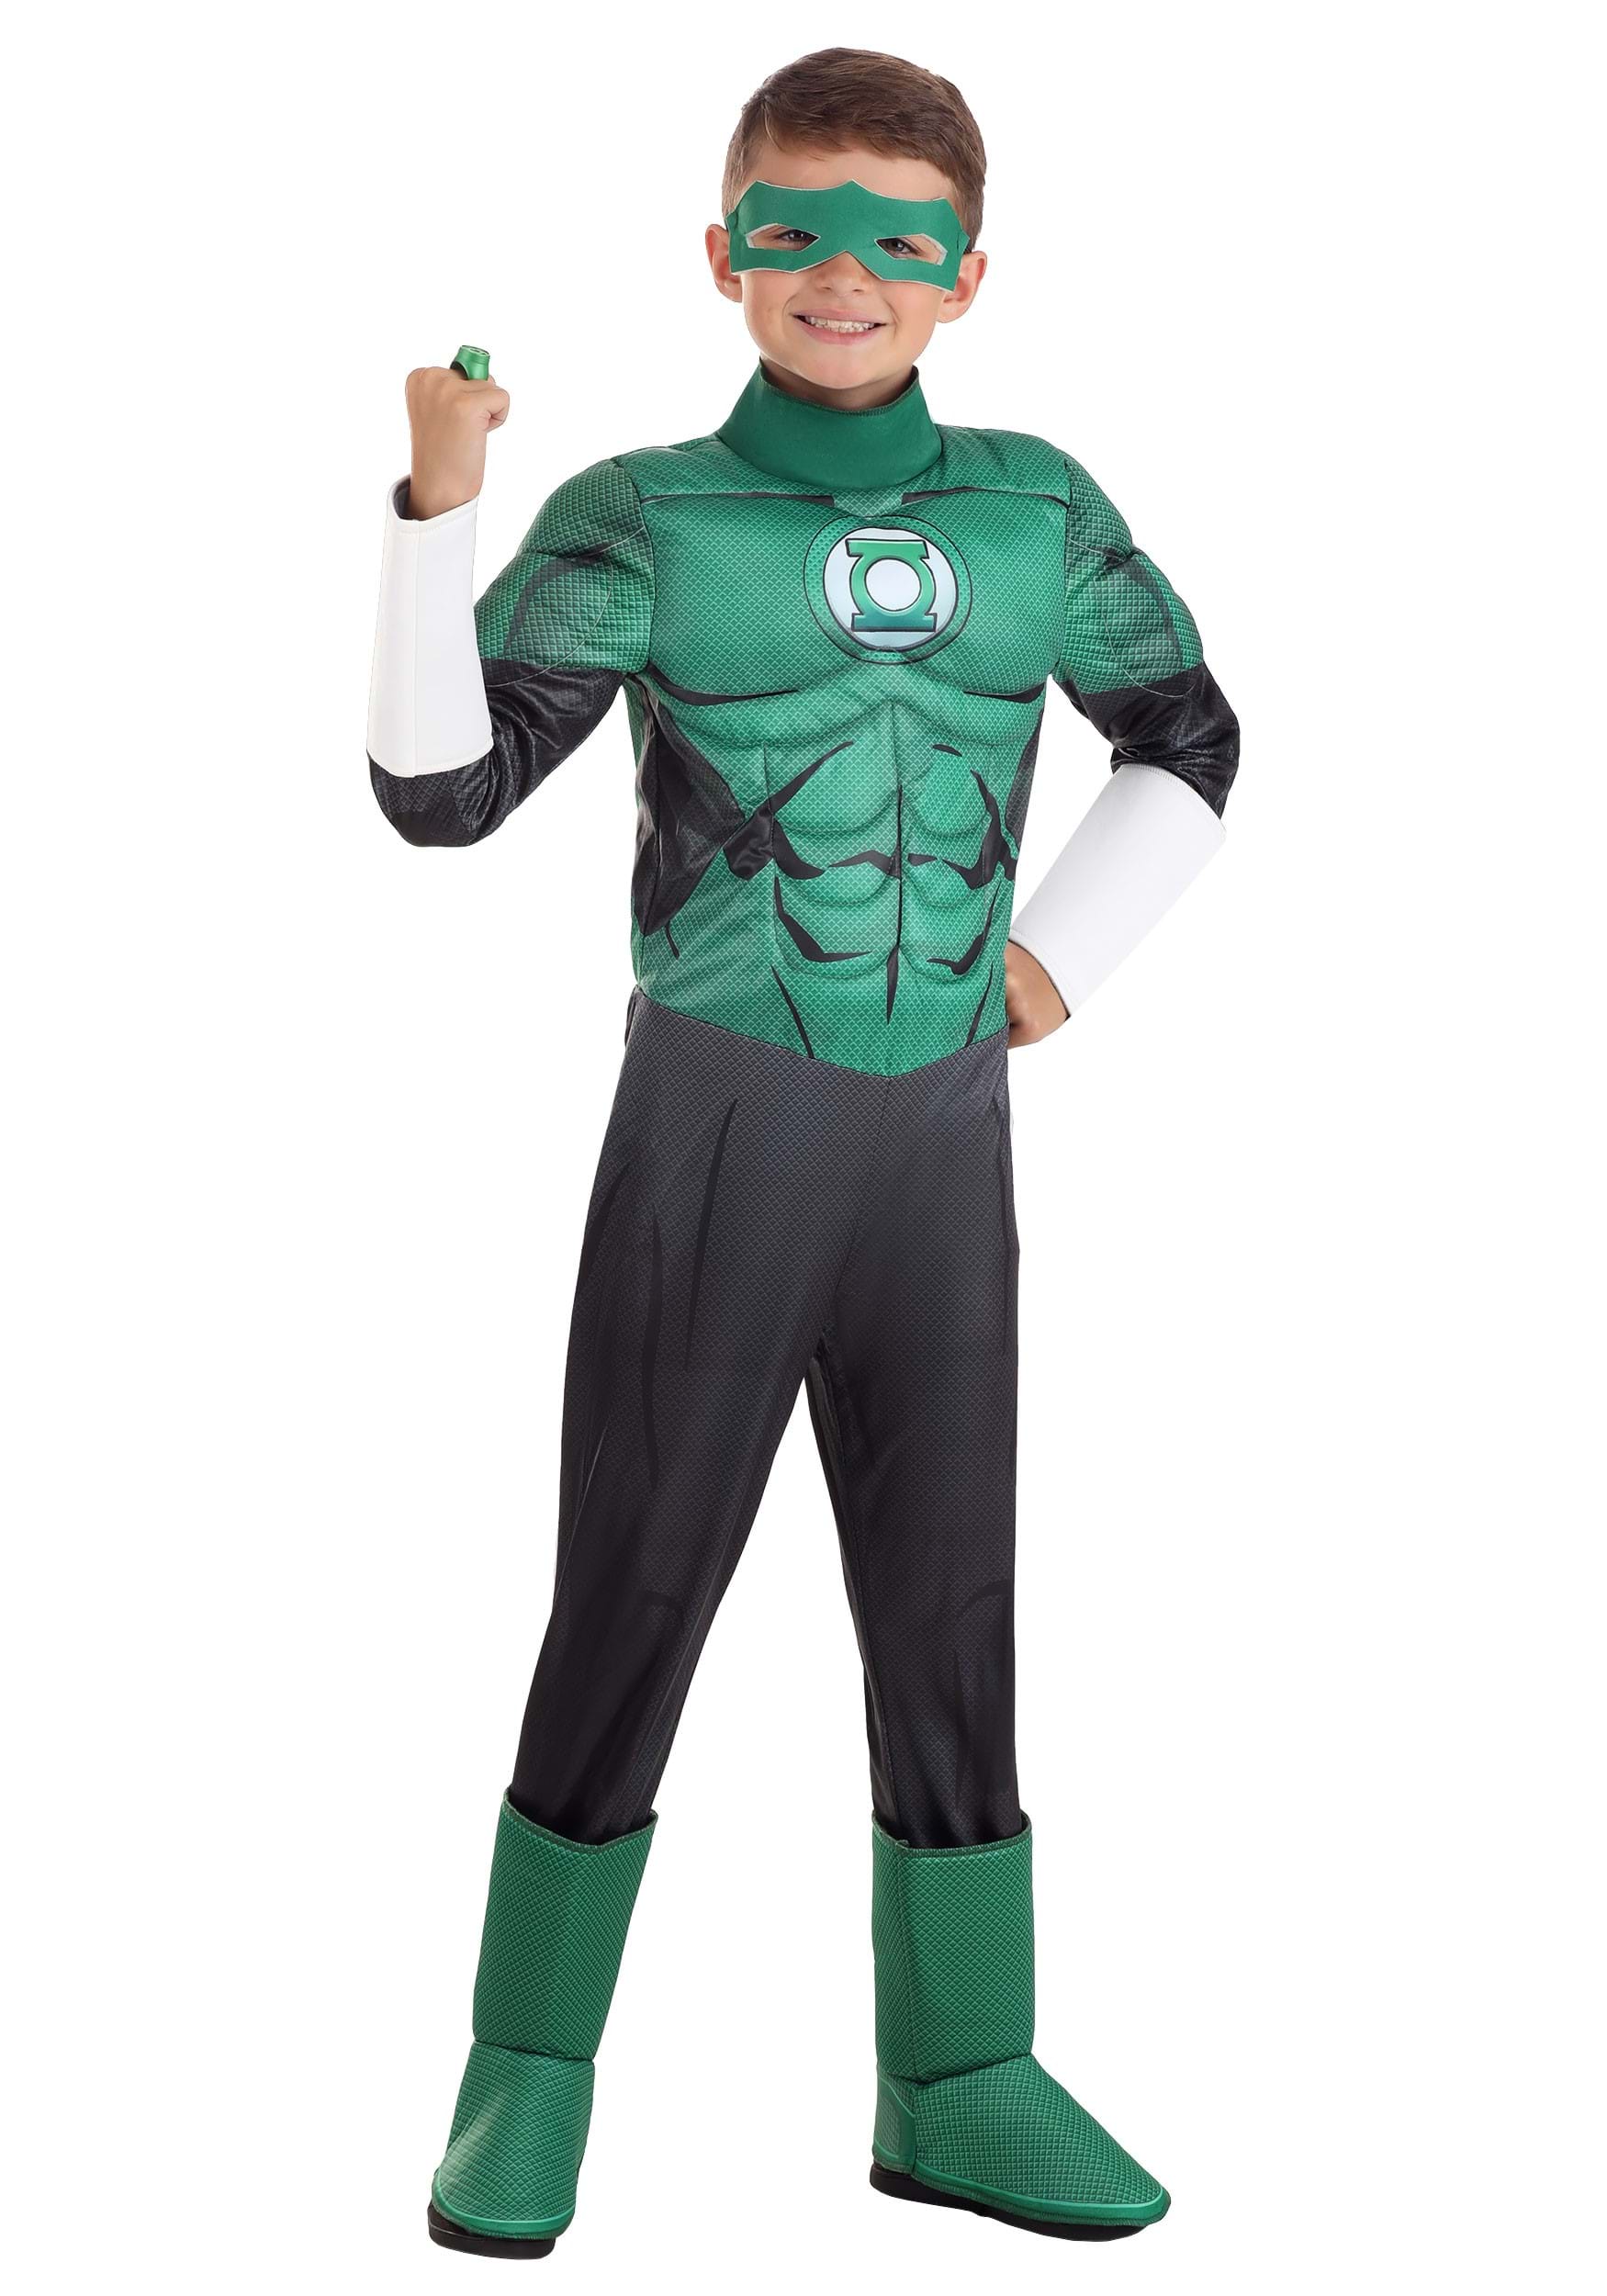 Photos - Fancy Dress Deluxe Jerry Leigh Green Lantern  Costume for Kids Black/Green/Whit 